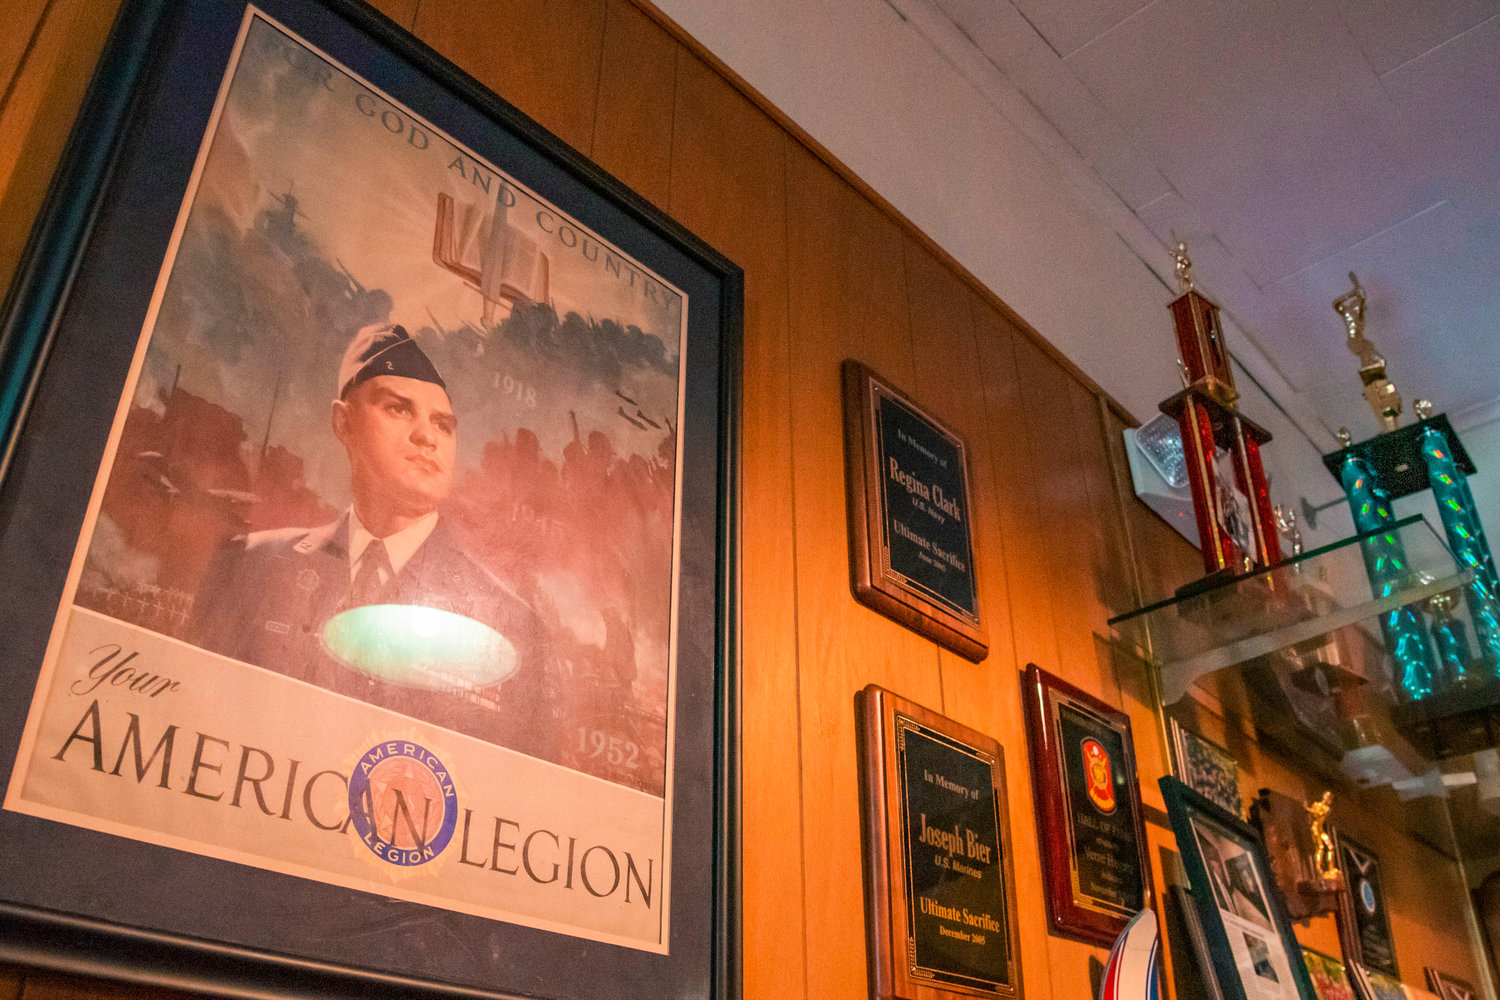 Awards and plaques sit on display inside the Centralia American Legion on Thursday.